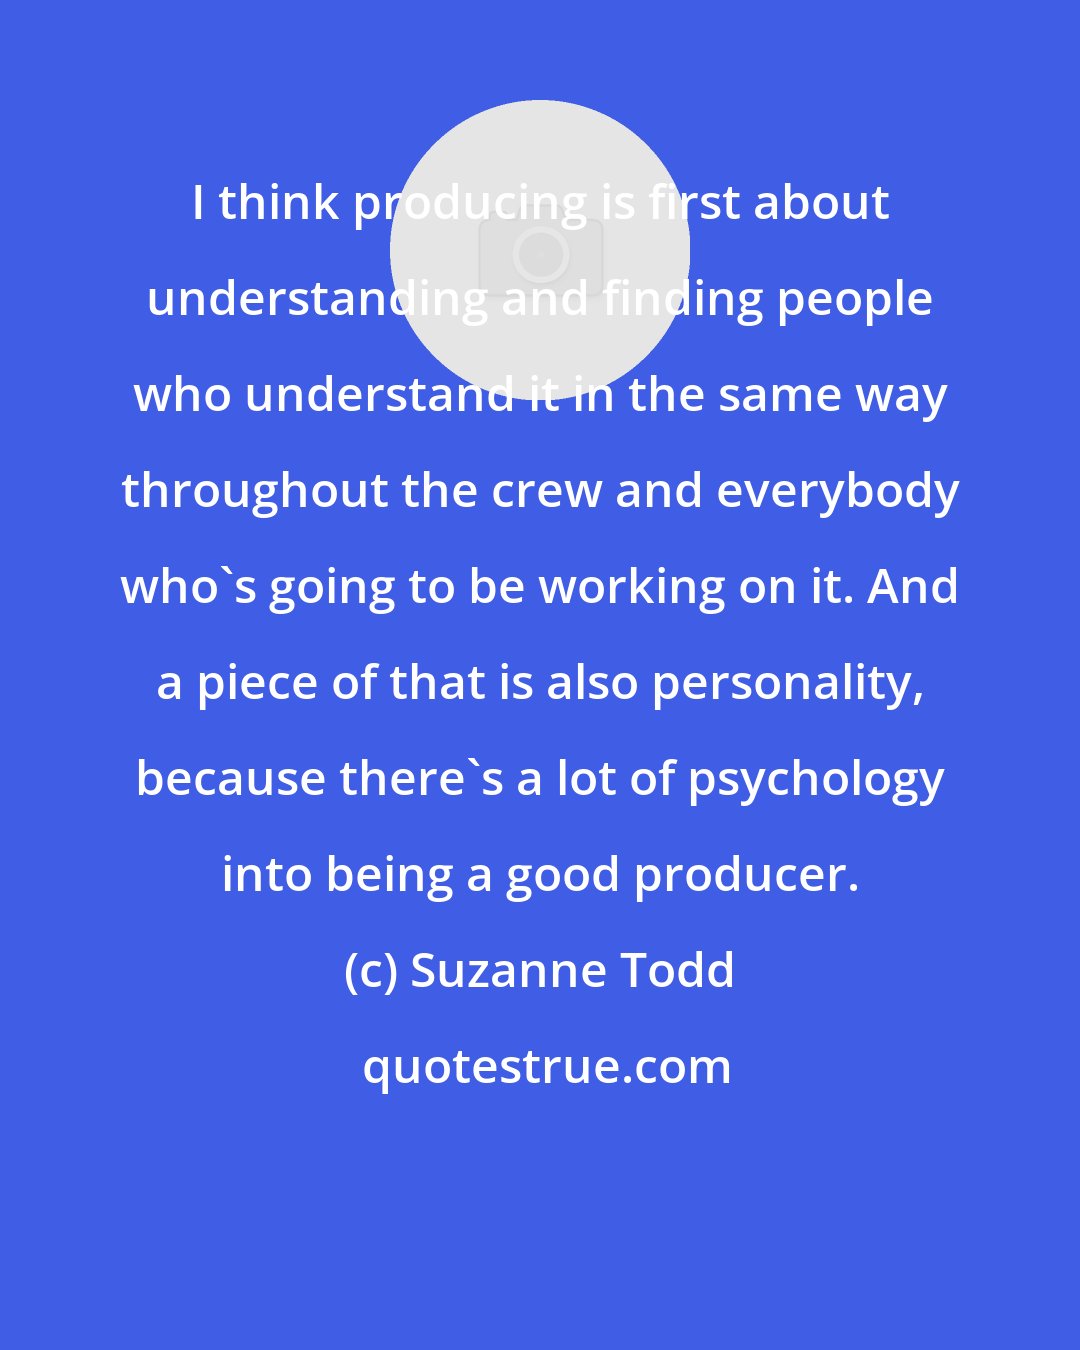 Suzanne Todd: I think producing is first about understanding and finding people who understand it in the same way throughout the crew and everybody who's going to be working on it. And a piece of that is also personality, because there's a lot of psychology into being a good producer.